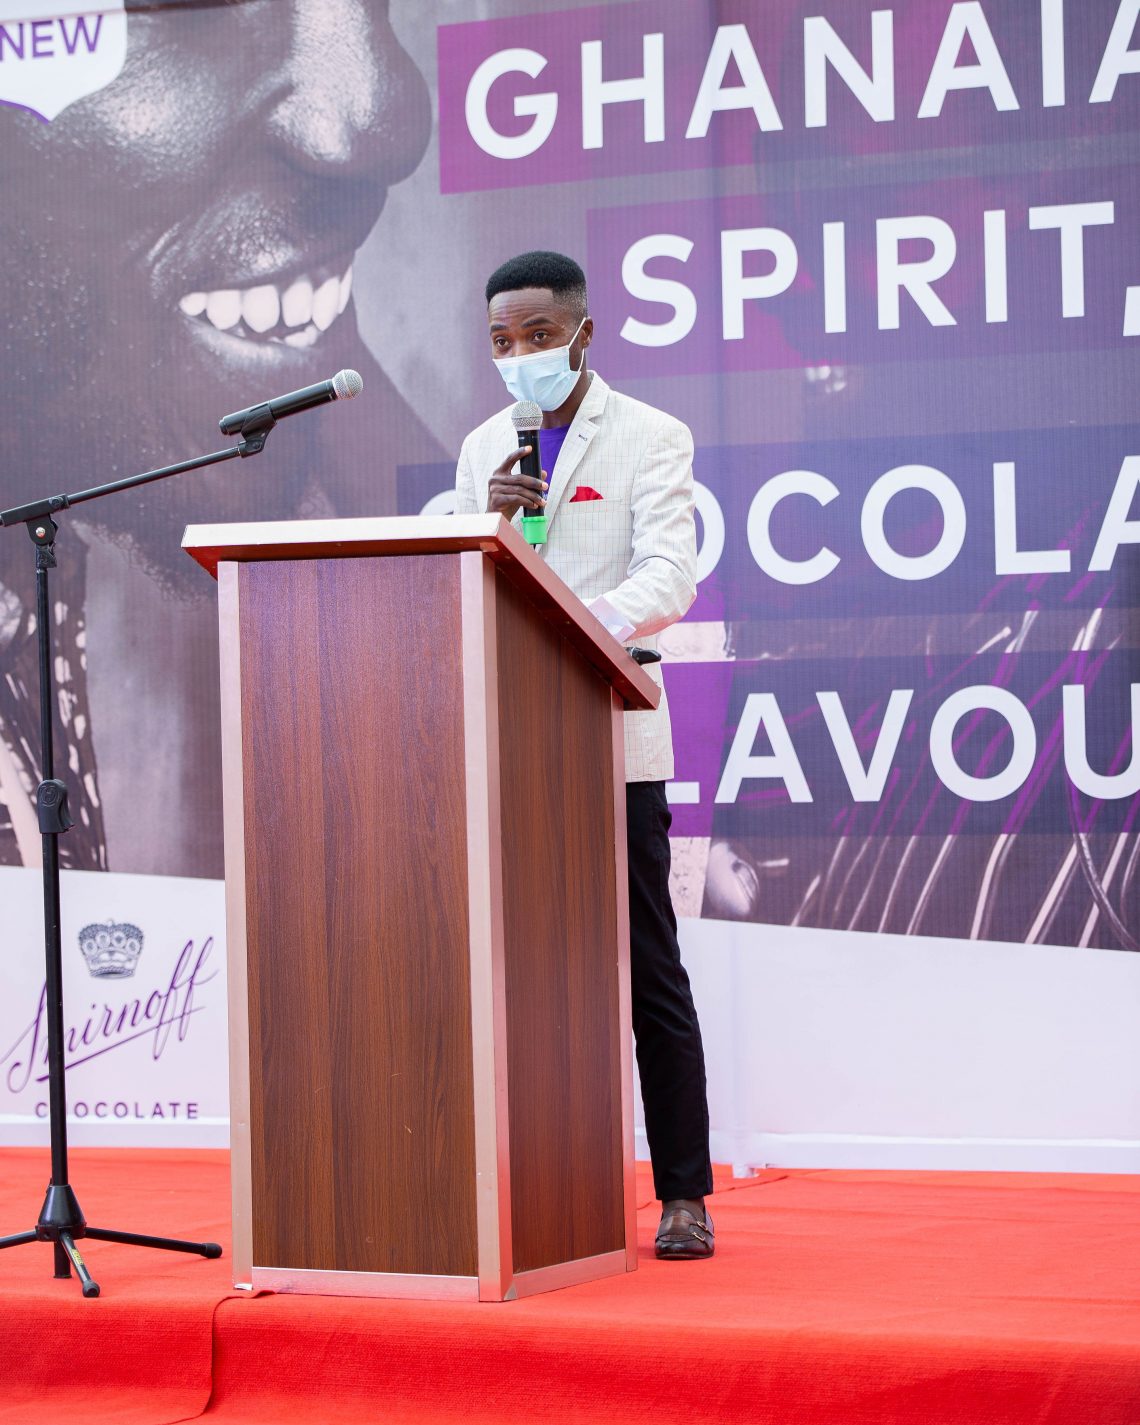 guinness-launches-new-product-smirnoff-chocolate-in-ghana